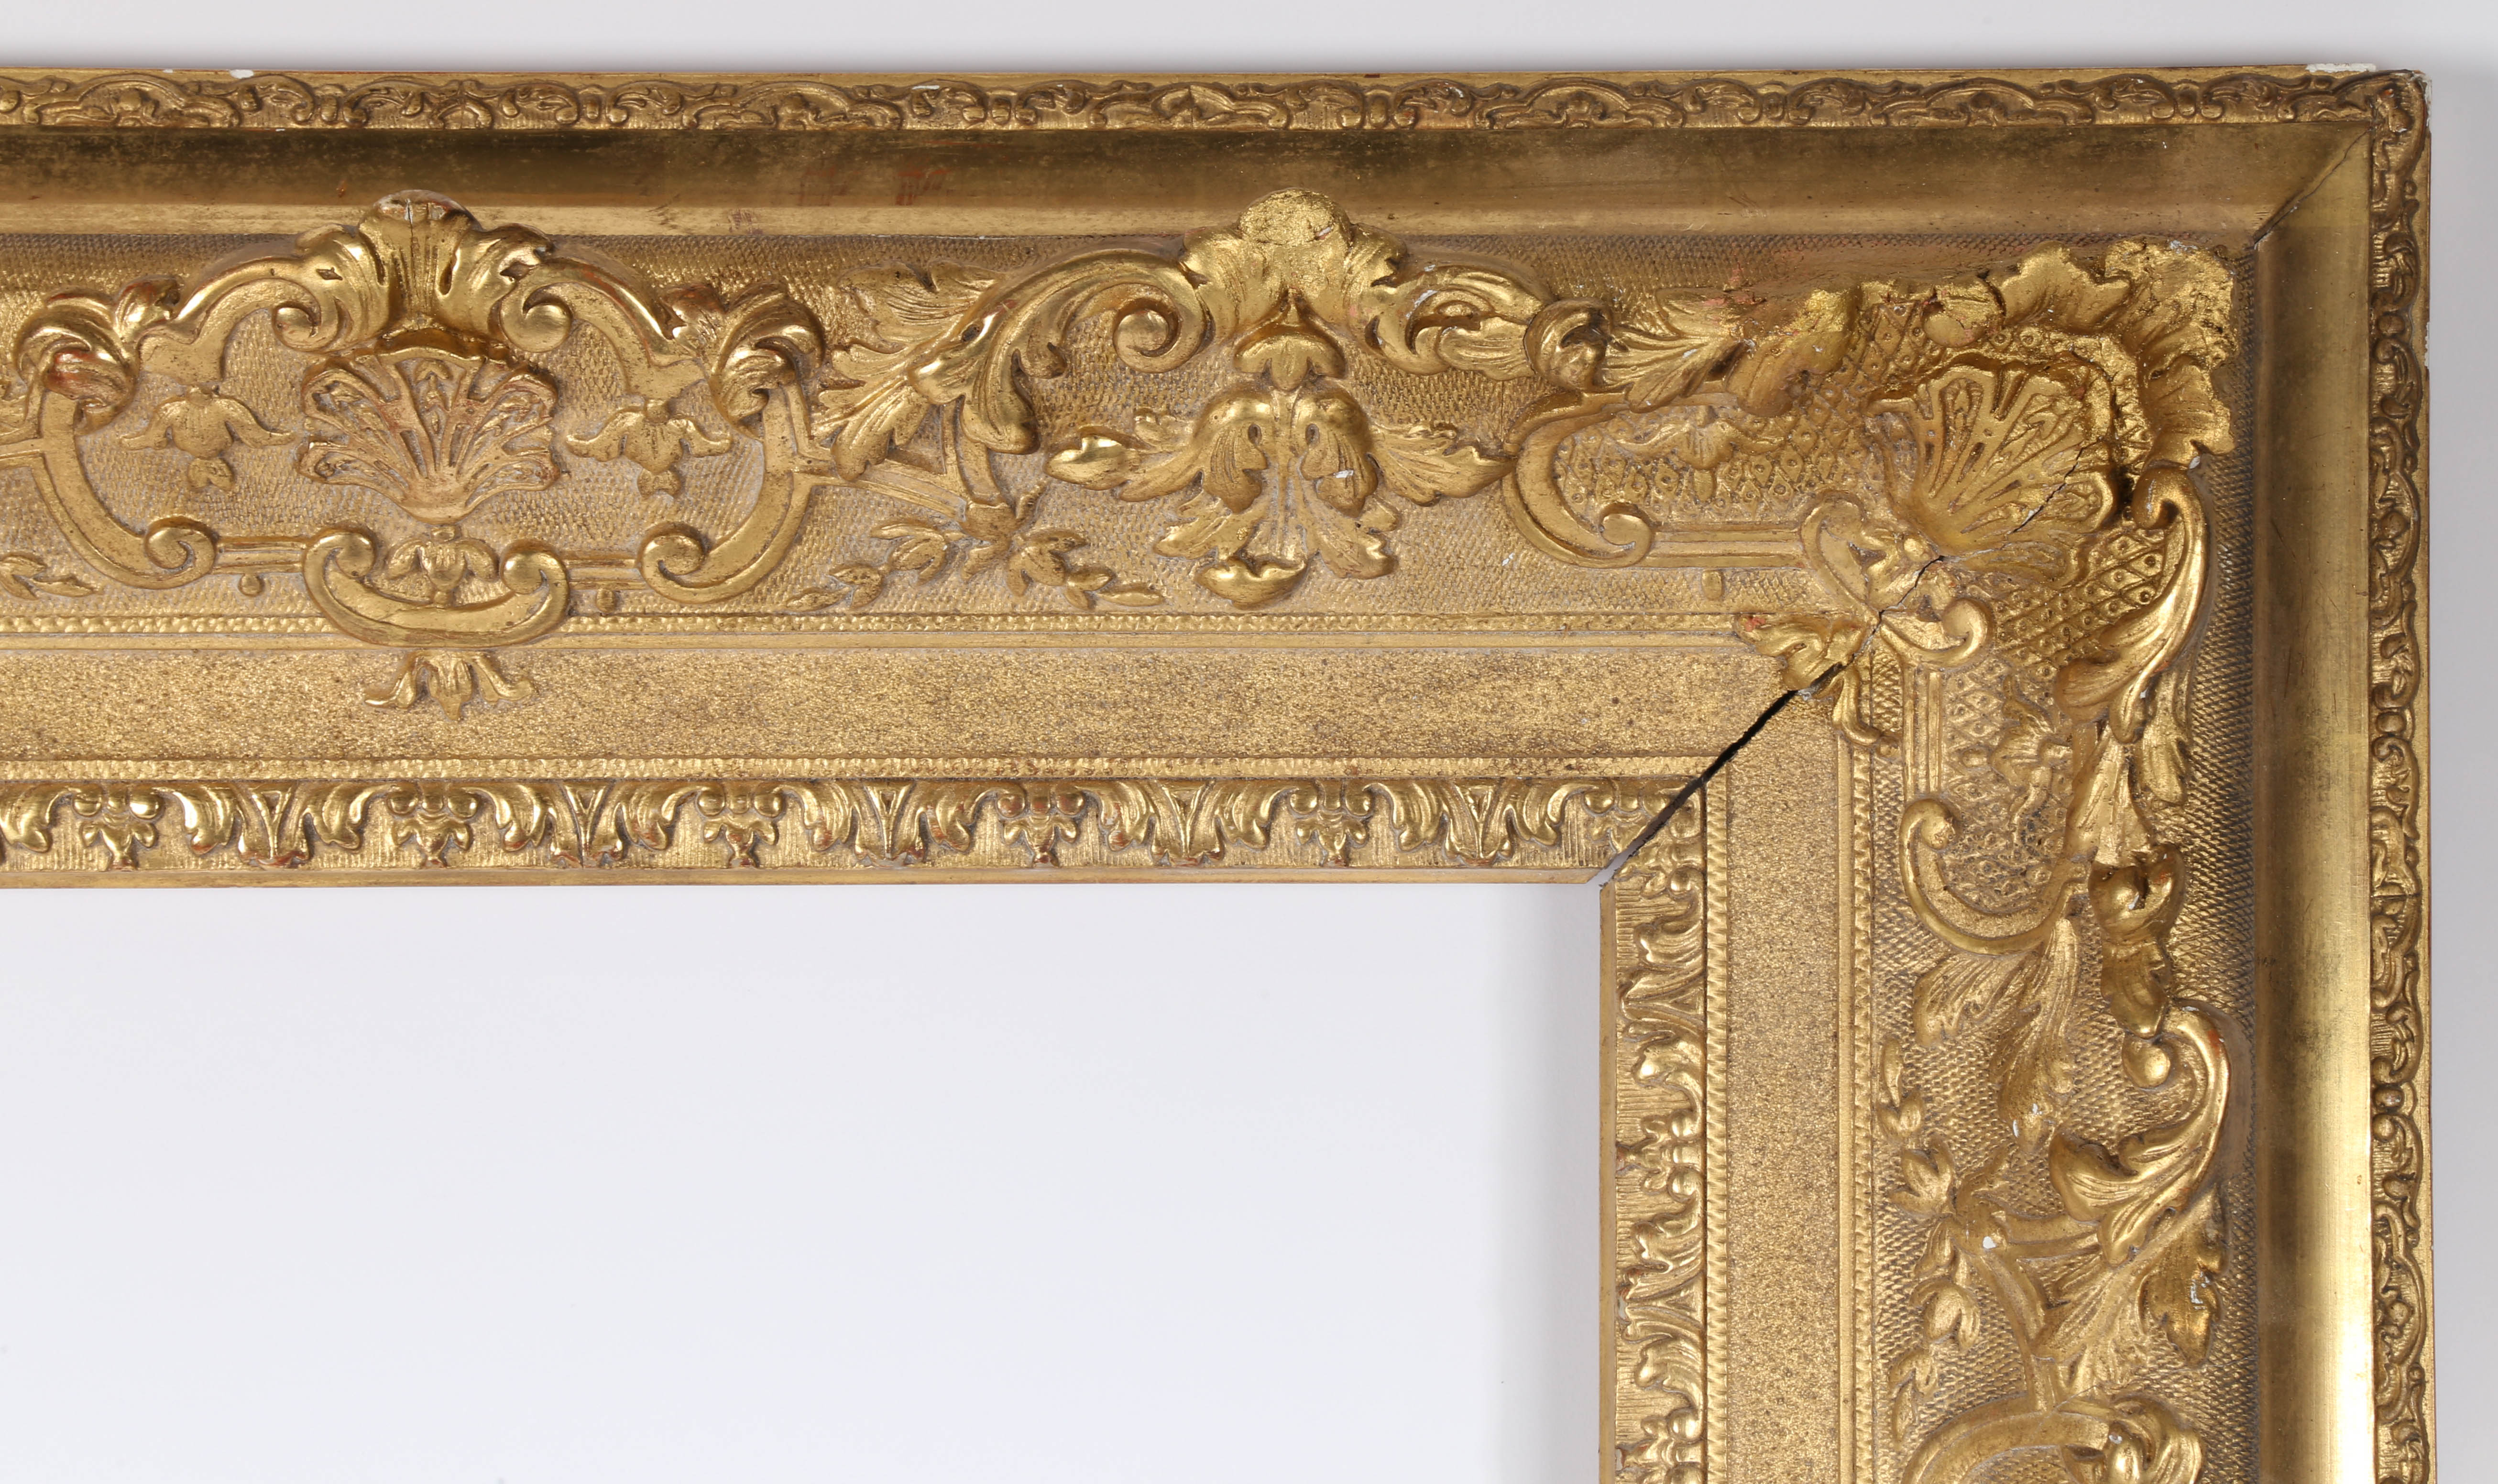 19th century French heavily moulded picture frame - rebate size 22in x 15.5in